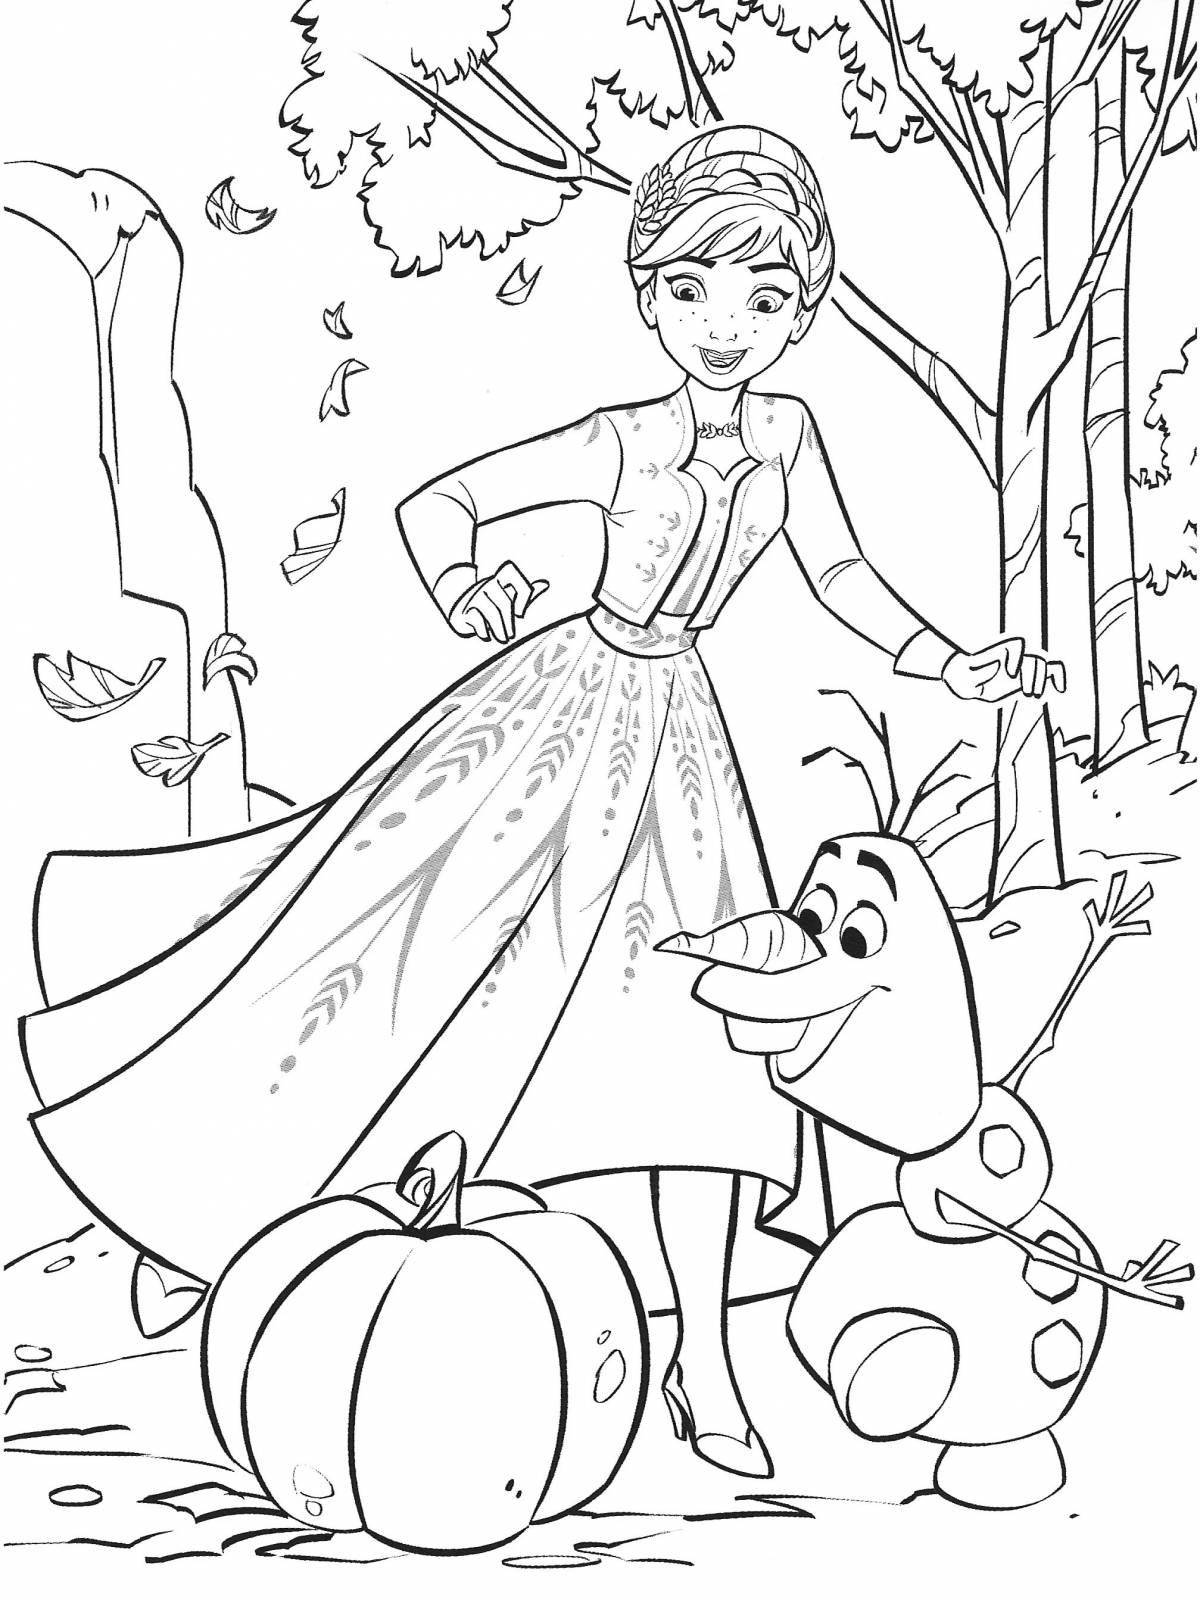 Frozen coloring book for children 5-6 years old